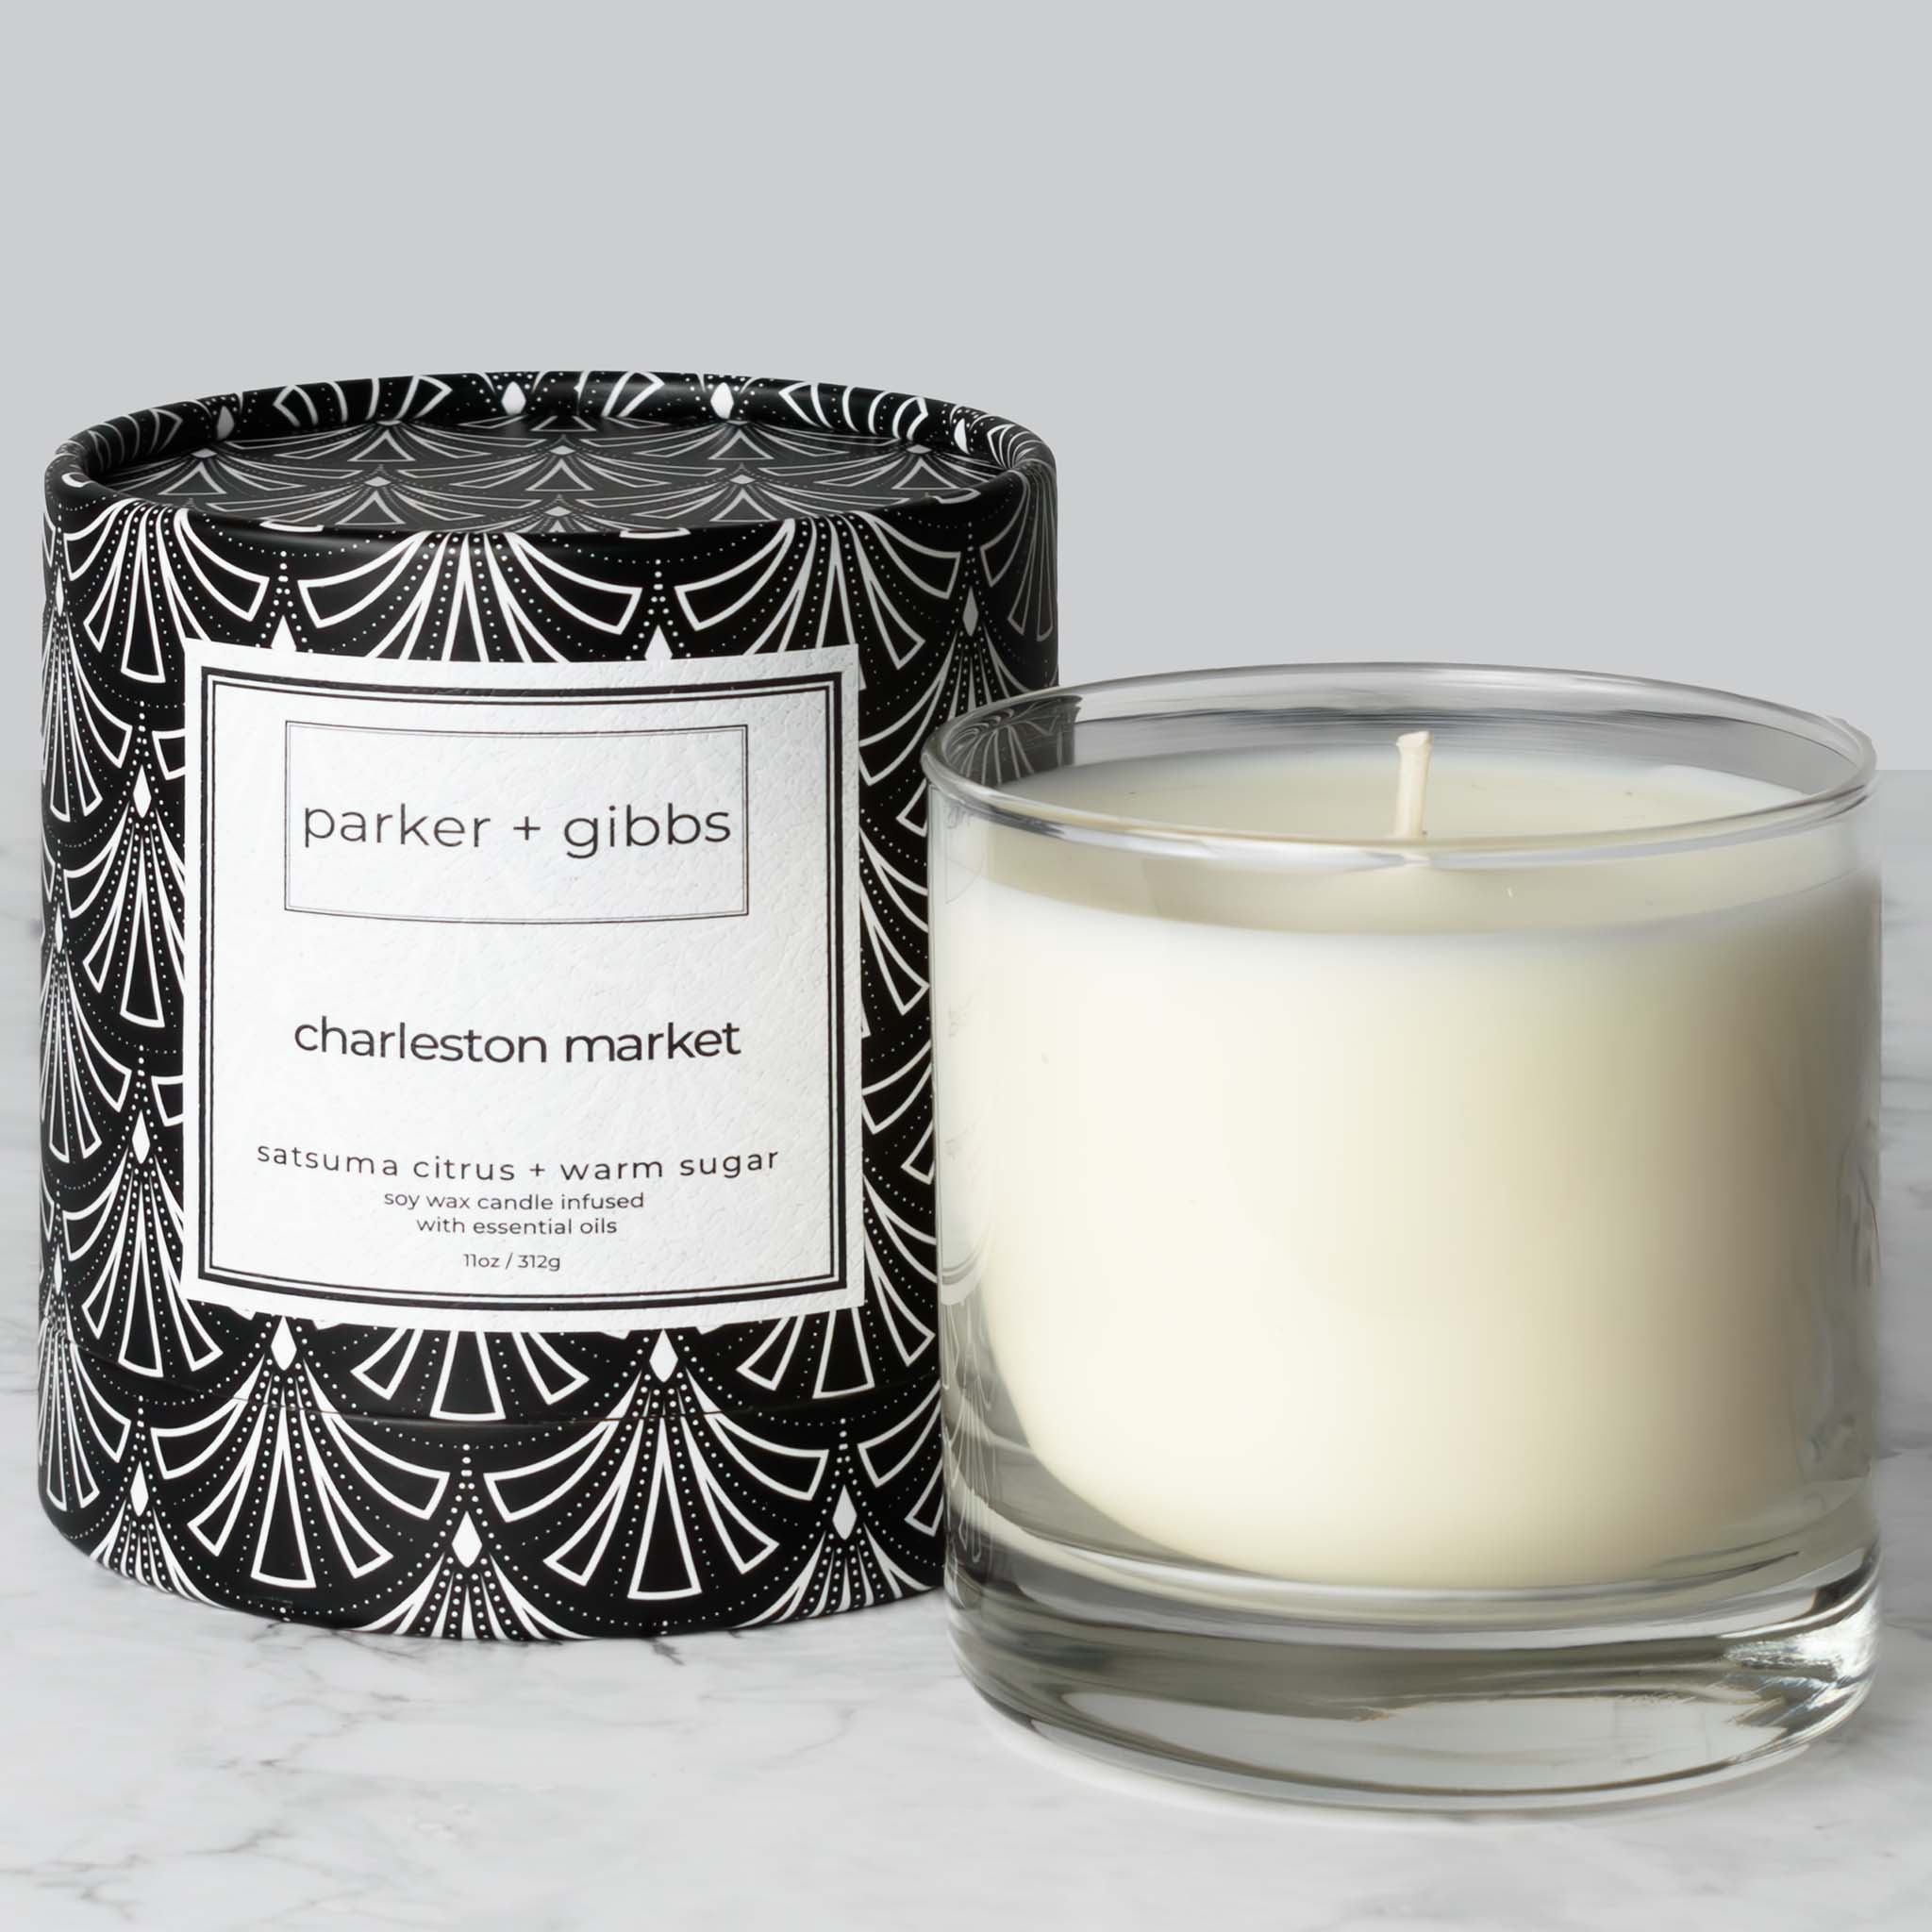 scented-soy-wax-blend-candle-with-satsuma-citrus-warm-sugar-essential-oils